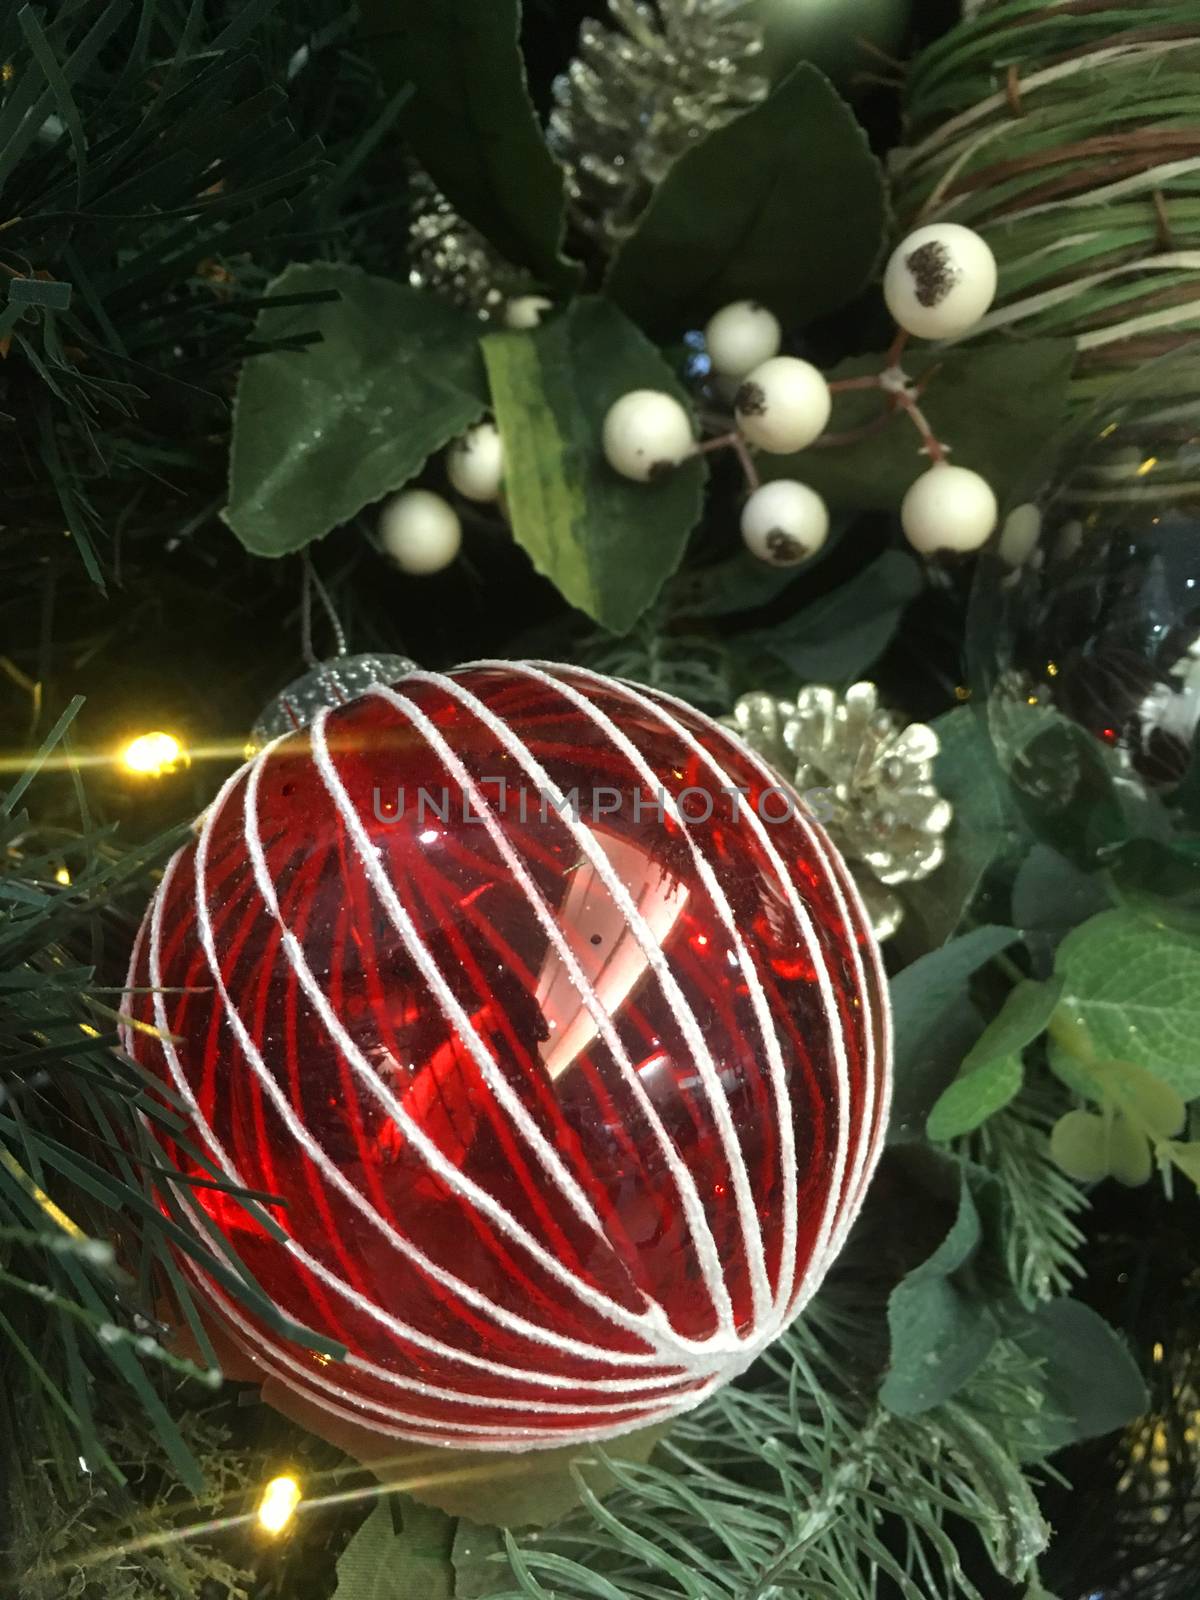 A red and white striped Christmas tree bauble hangs on a Christmas tree in the holiday season.